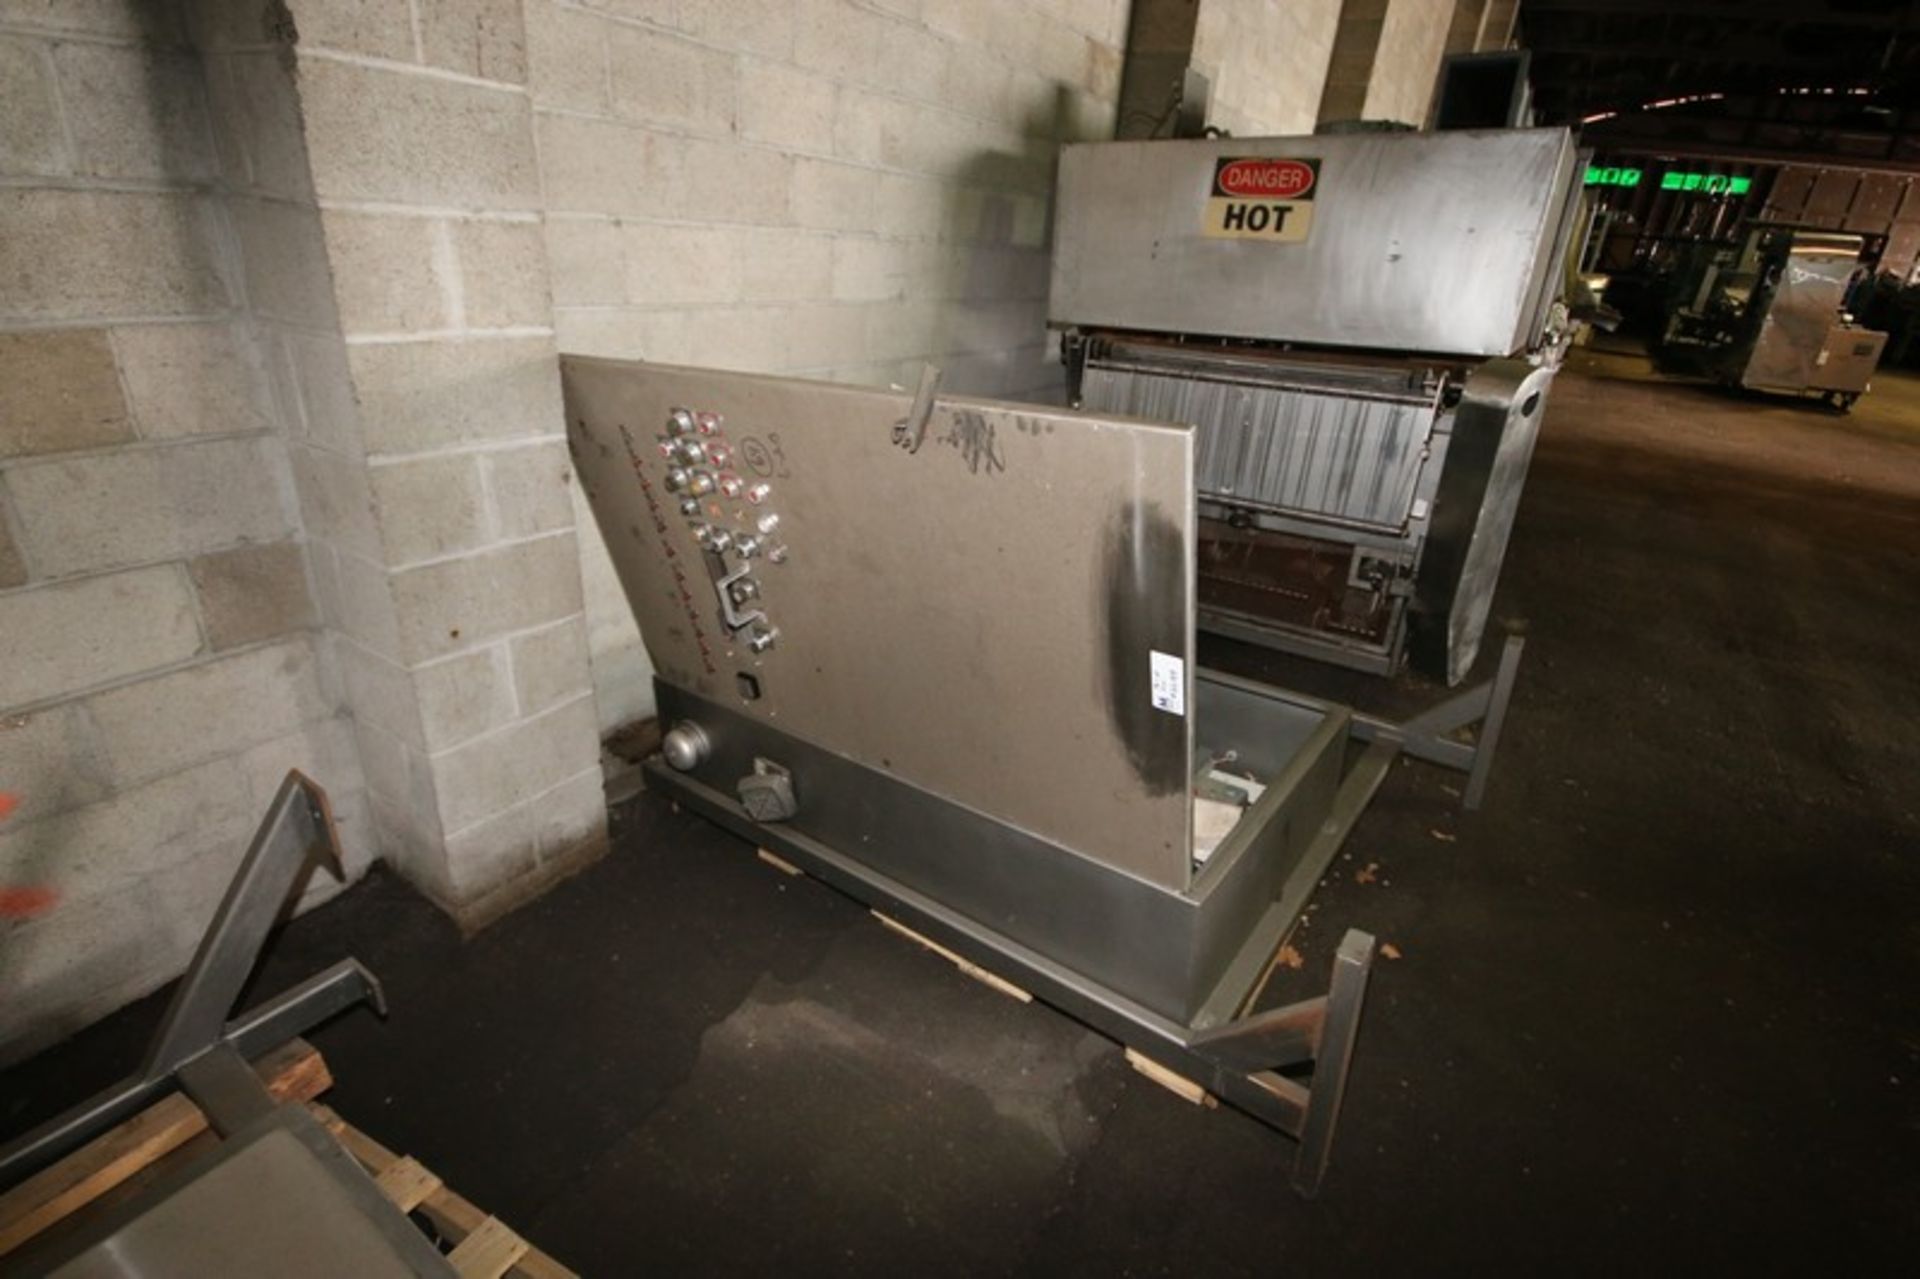 Higgs S/S Conveyor Bakery Fryer,Natural Gas Heated, 14' L x 54"W, Includes Exhaust Hood & Control - Image 11 of 11